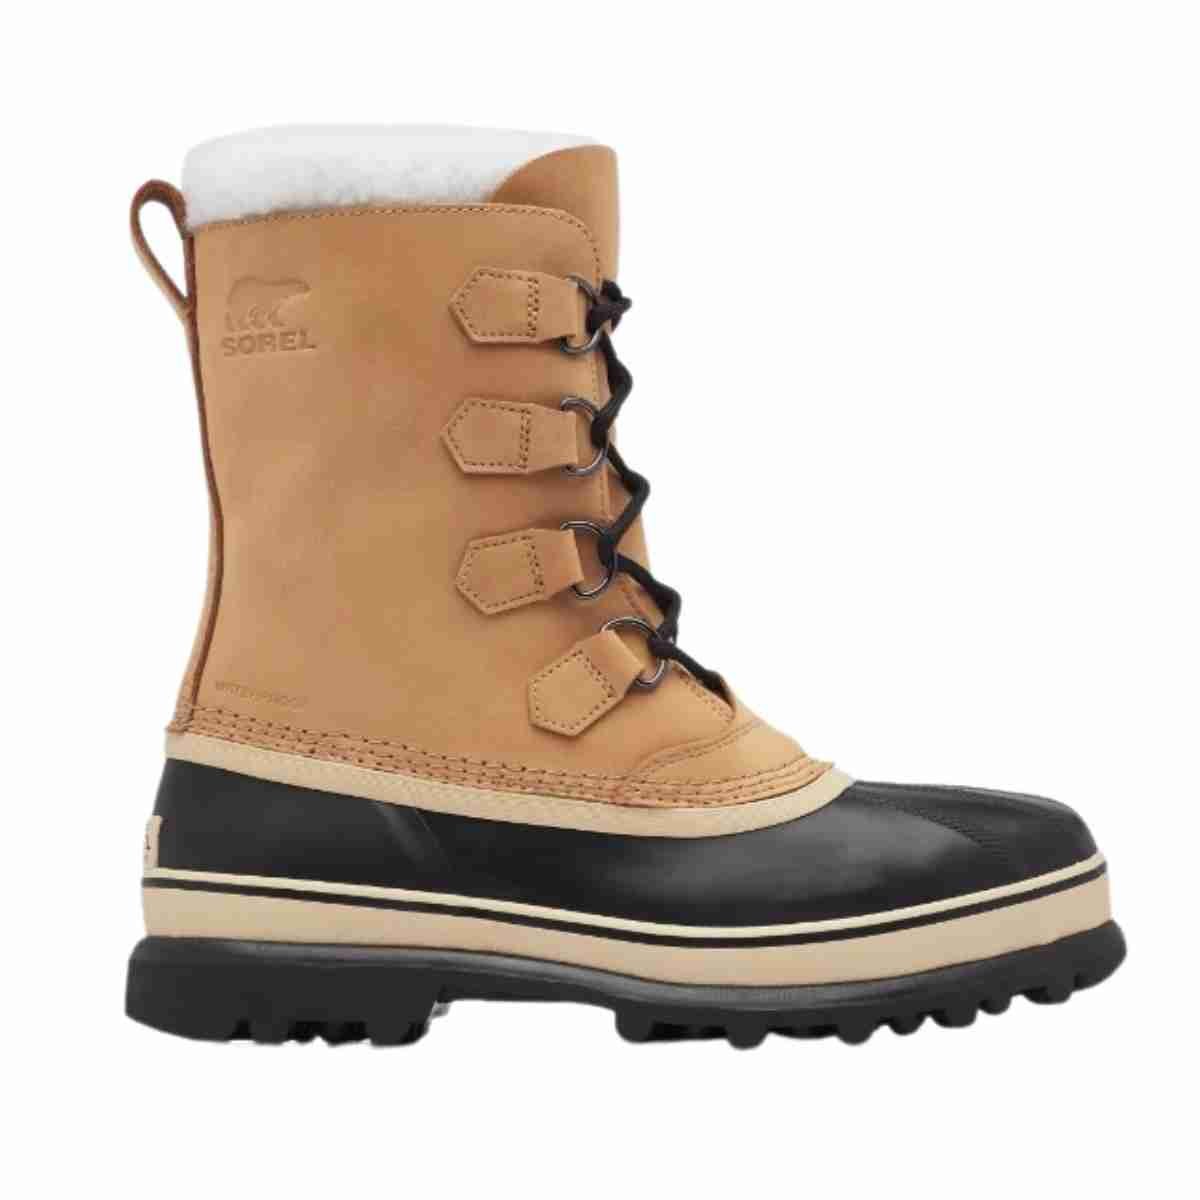 11 Best Men's Winter Boots To Buy In Australia In 2022  Checkout – Best  Deals, Expert Product Reviews & Buying Guides